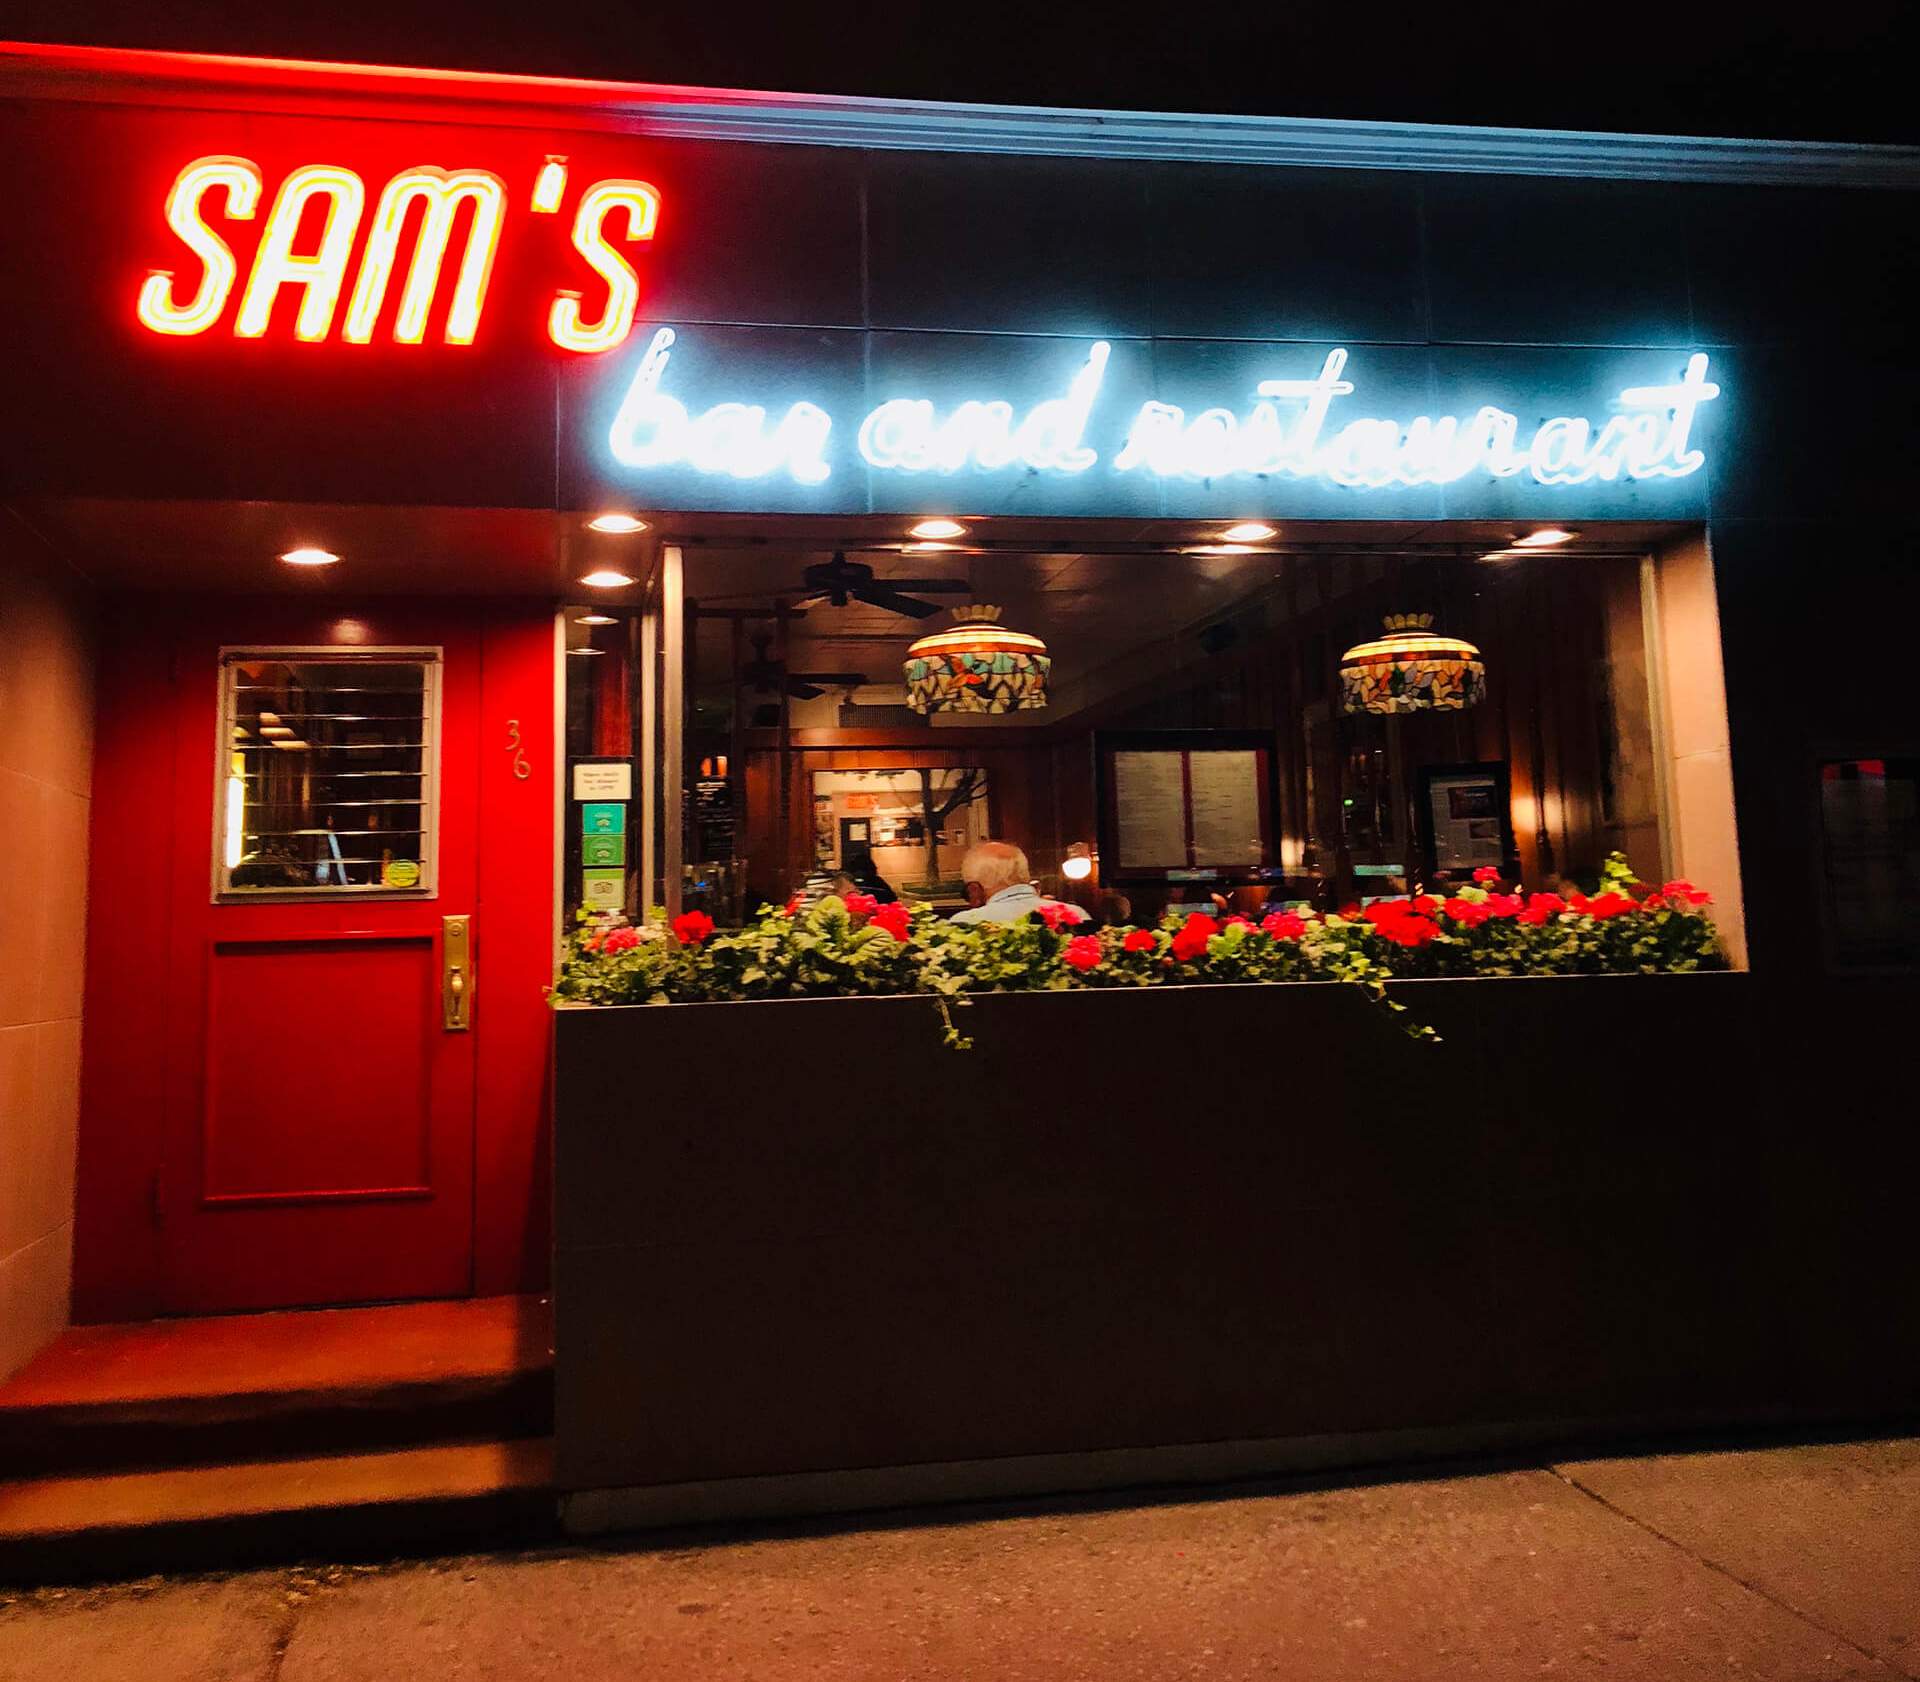 Sam's Bar and Restaurant in East Hampton, home of Sam's famous pizza